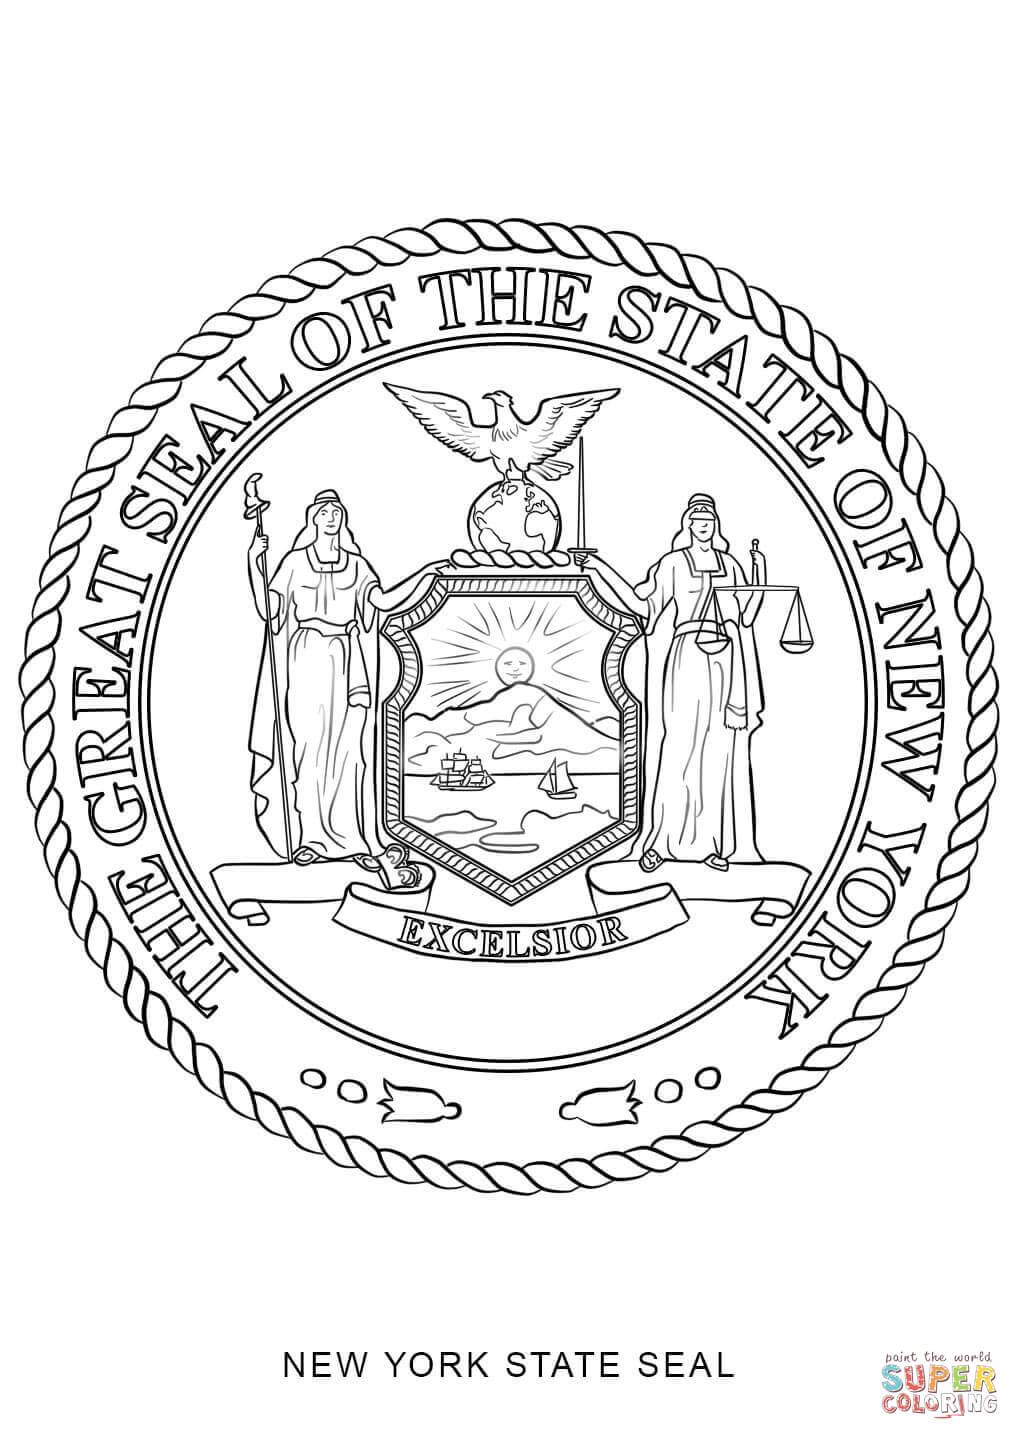 New York State Seal coloring page | Free Printable Coloring Pages